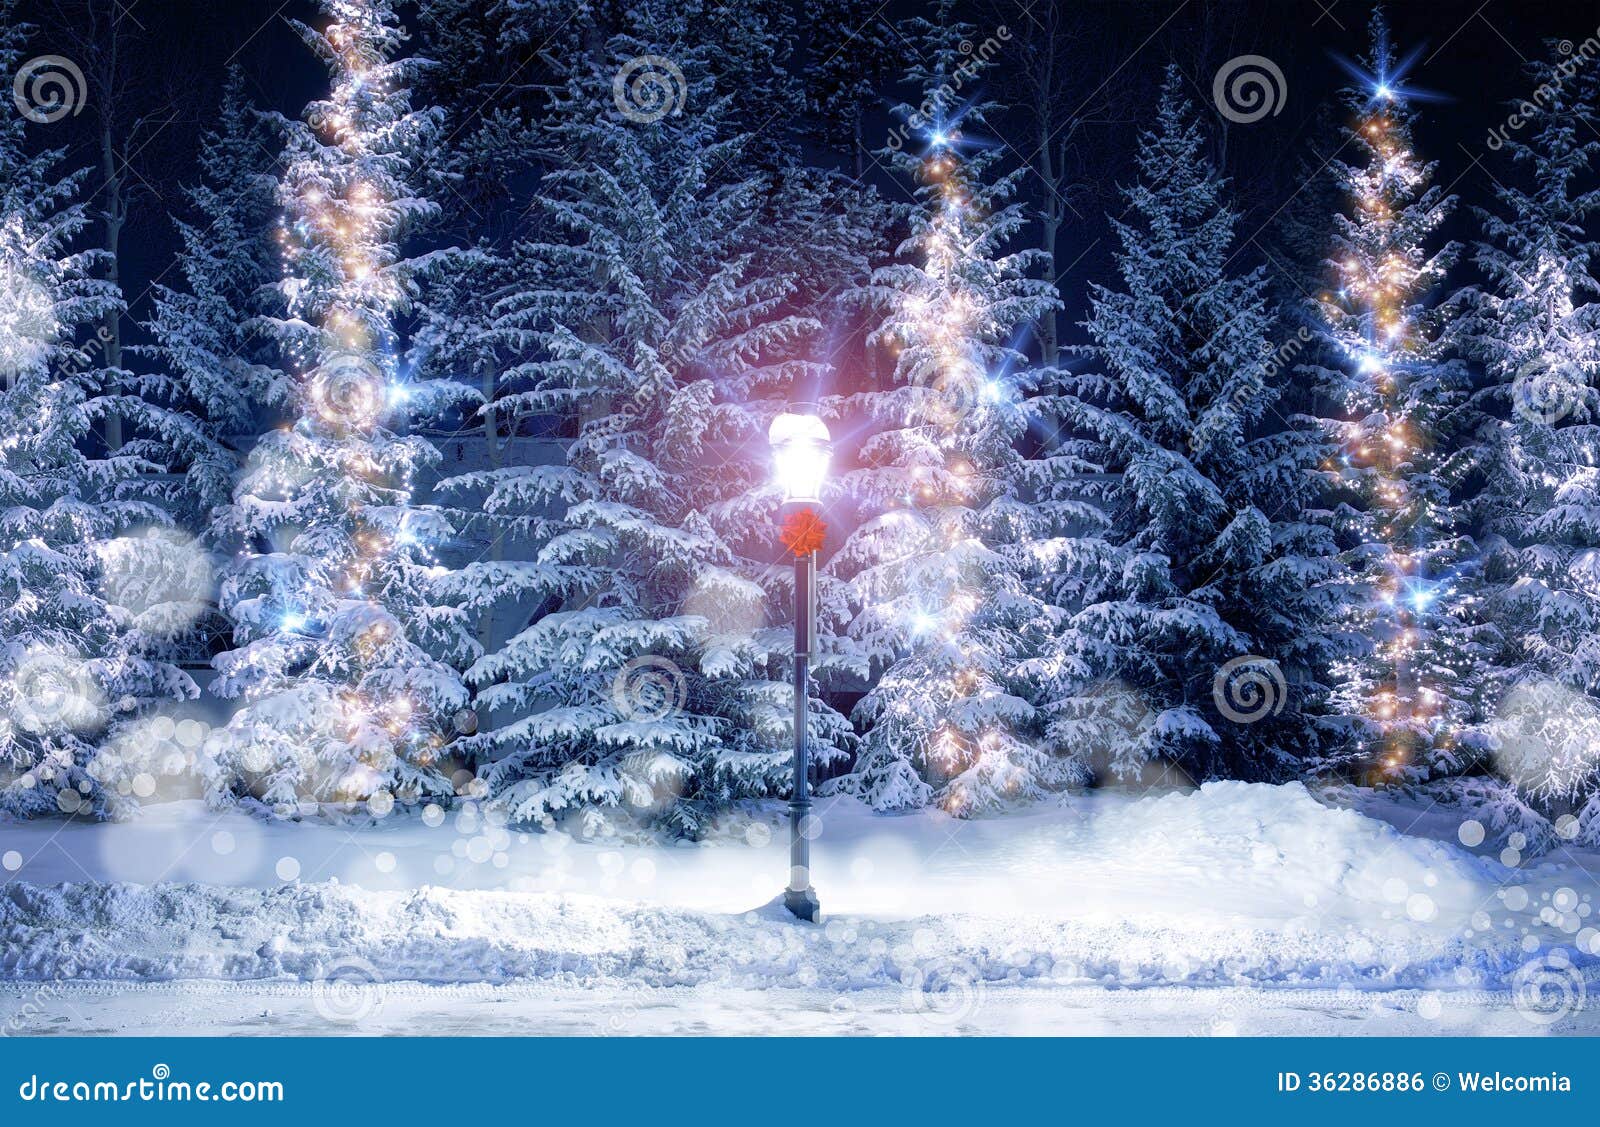 Snowy Christmas Scenery Snowy christmas scenery with